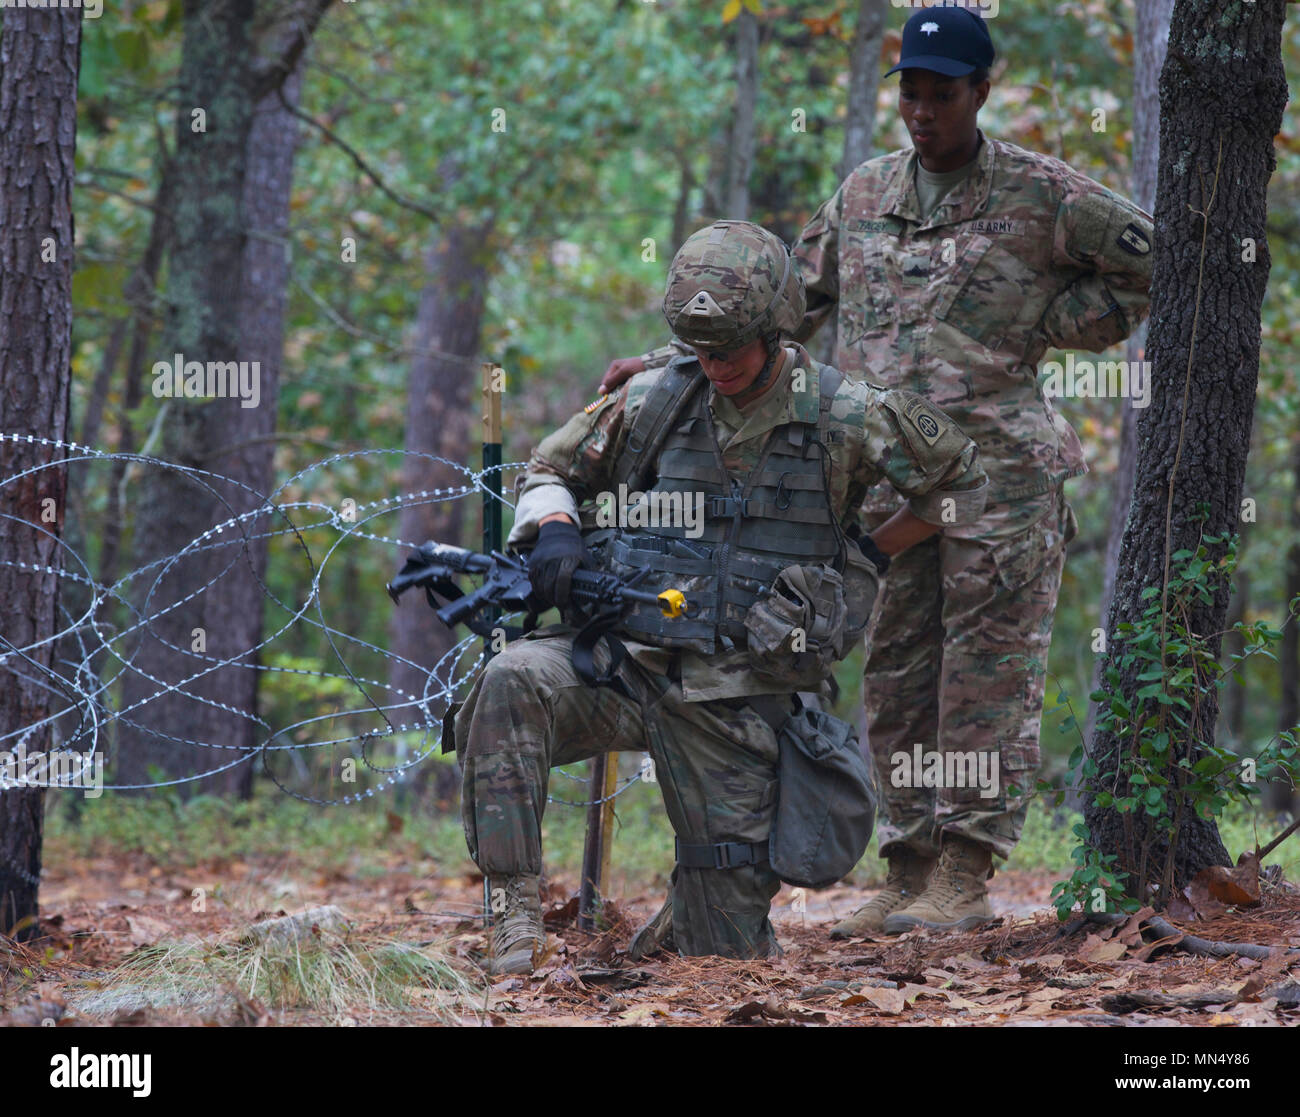 U.S. Armu soldier gets instructed during the the Expert Field Medical Badge (EFMB) on Fort Bragg, Nc., Oct. 16, 2017. The EFMB is awarded to U.S. Military personal who complete a set of tasks including both physical and mental exams. (U.S. Army photo by Pvt. Vincent Fausnaught.) Stock Photo